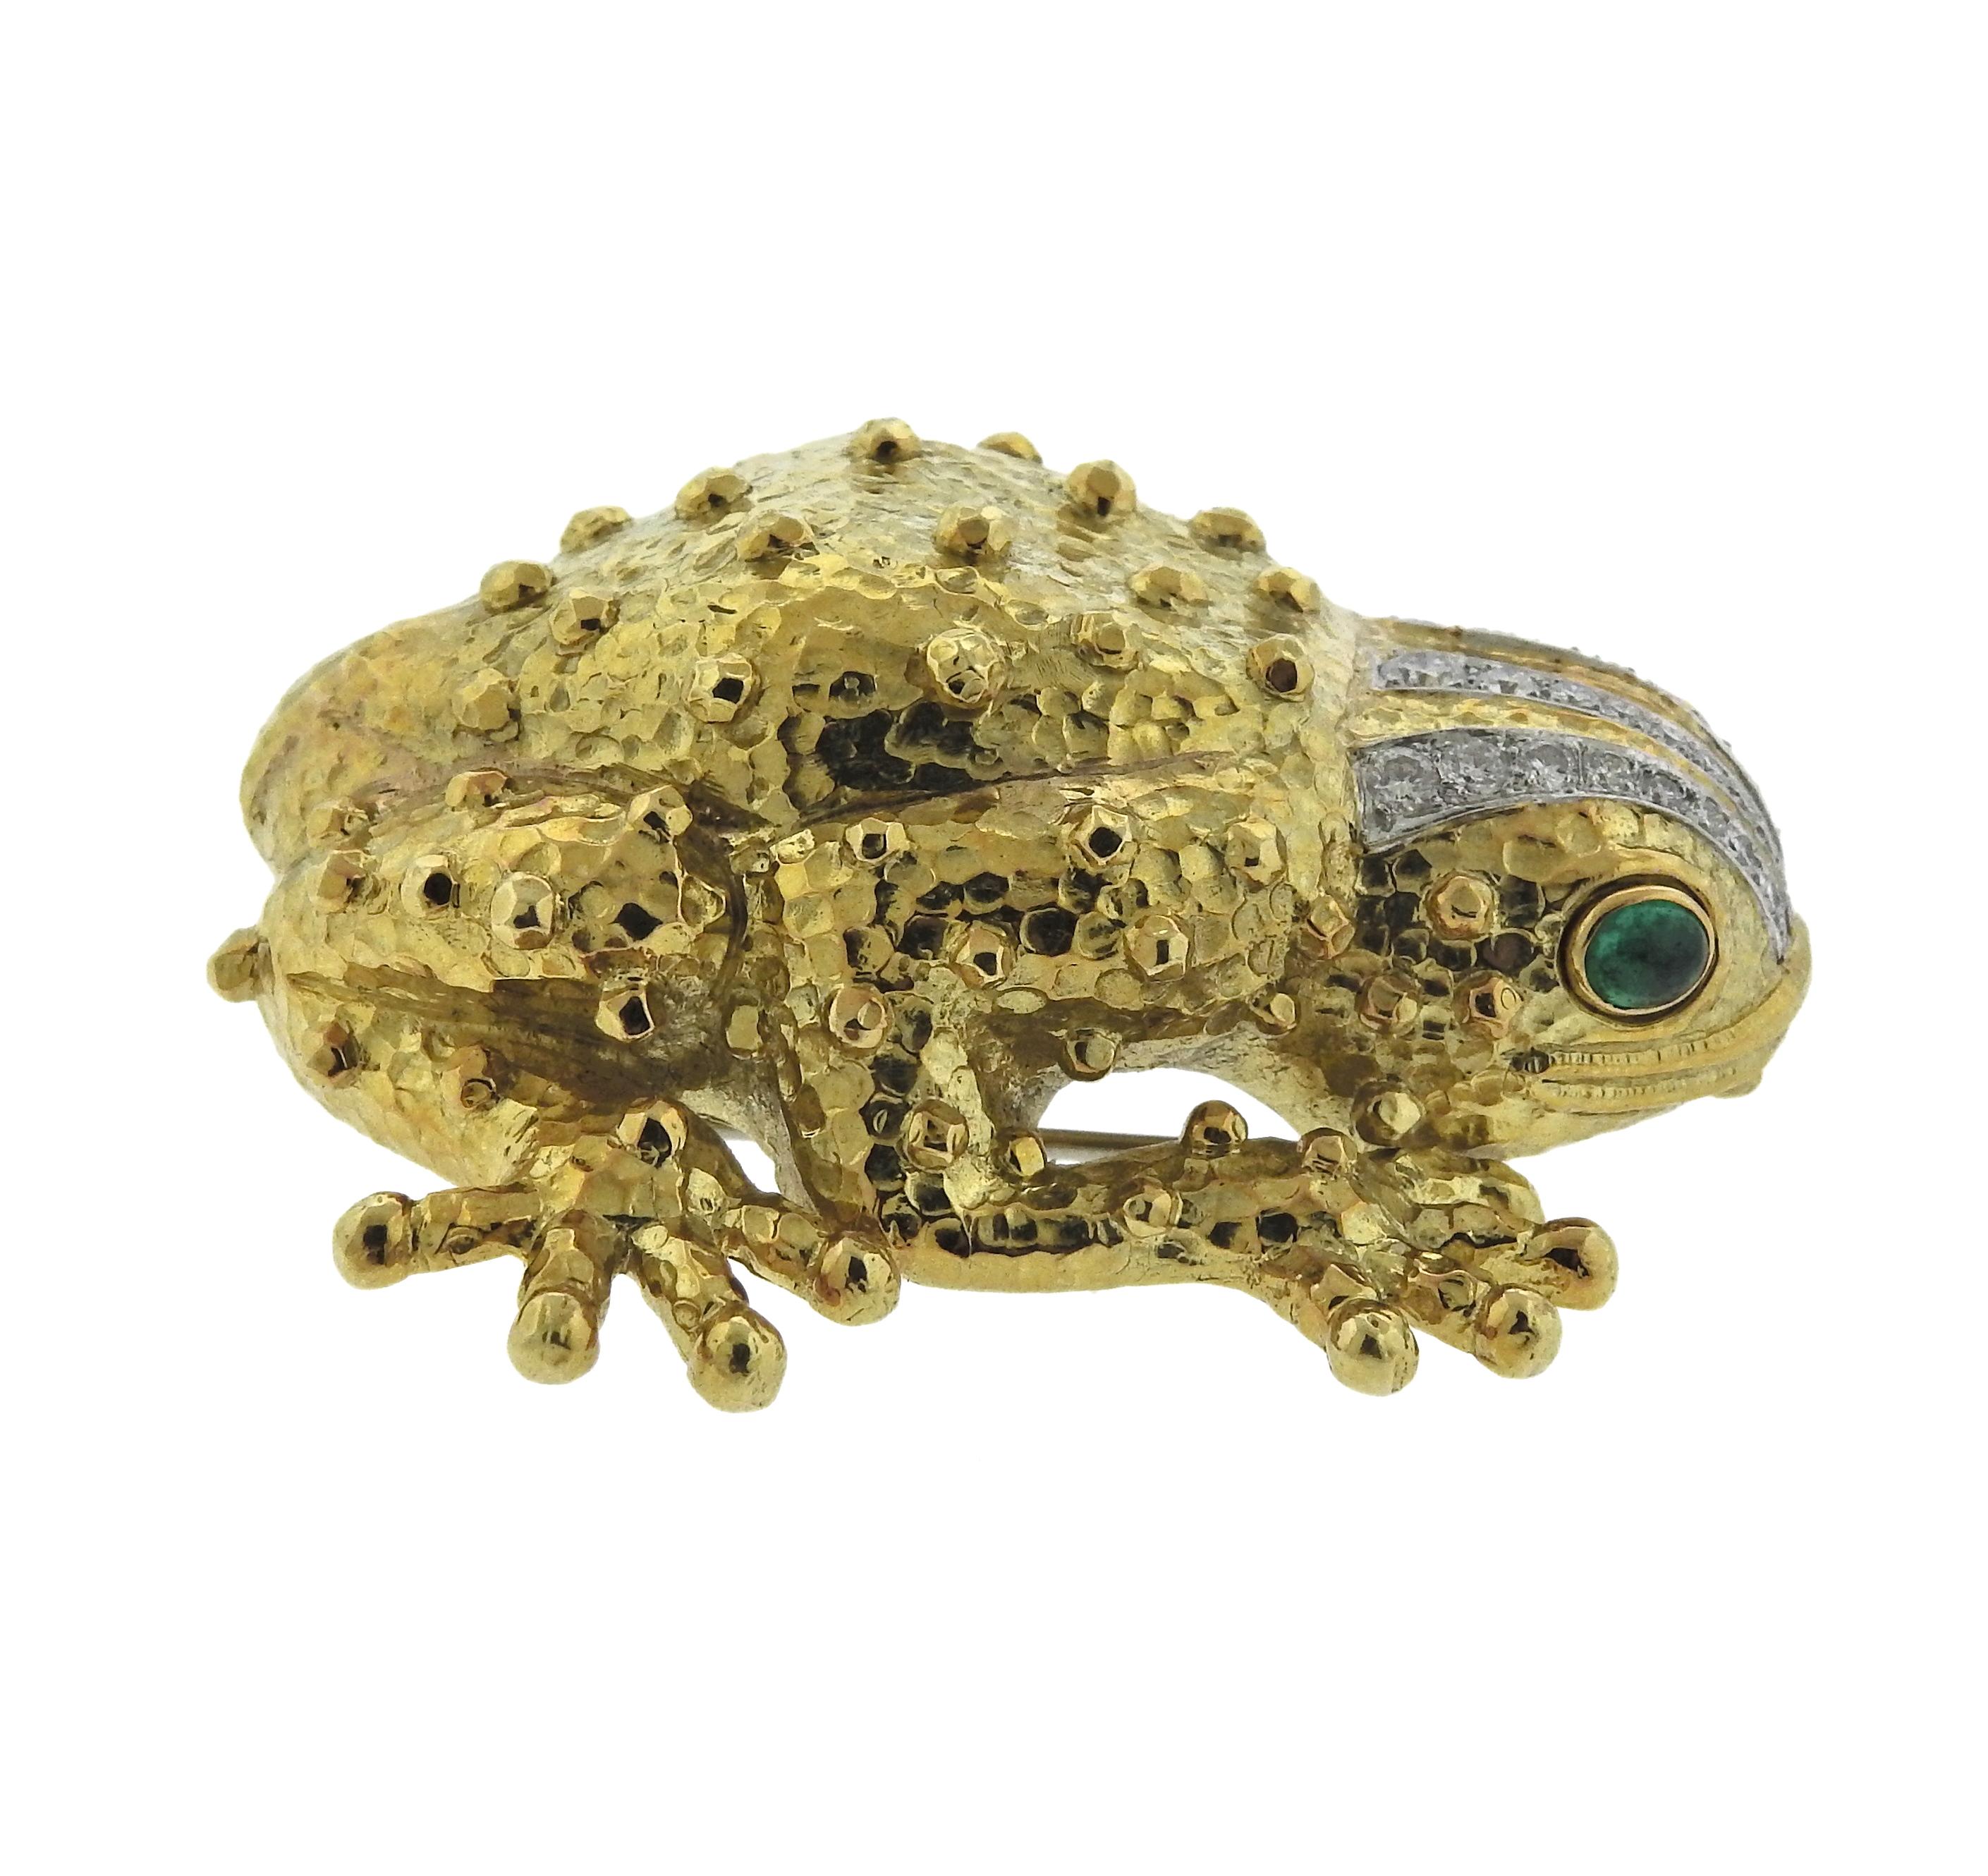 Large 18k gold and platinum frog brooch pendant, crafted by David Webb, set with emerald eyes and approx. 1.08ctw in H/VS diamonds. Brooch is 55mm x 51mm, weighs 65.4 grams. Marked: Plat, 18k, Webb.